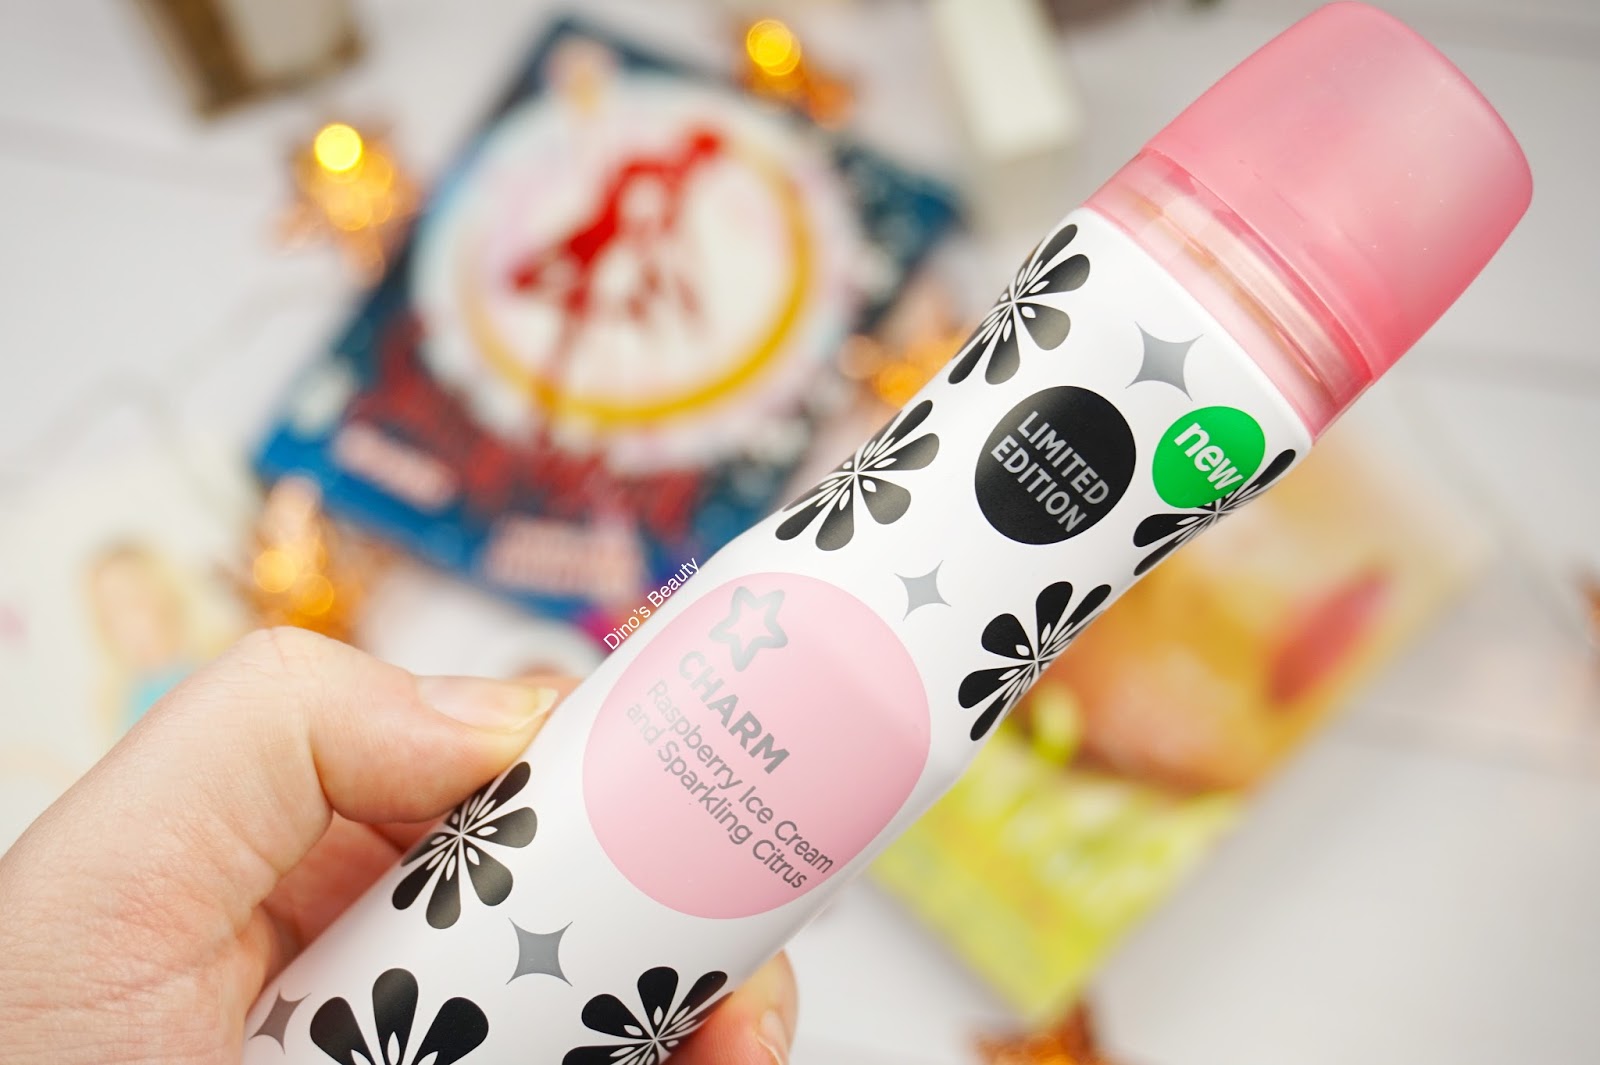 Beauty, Lifestyle, Beauty Bloggers, Bloggers, Lifestyle Bloggers, 2016, 2016 Favourites, Superdrug, Body Spray, Charm, Raspberry Ice Cream, Sparkling Citrus, fragrance, Superdrug Exclusive